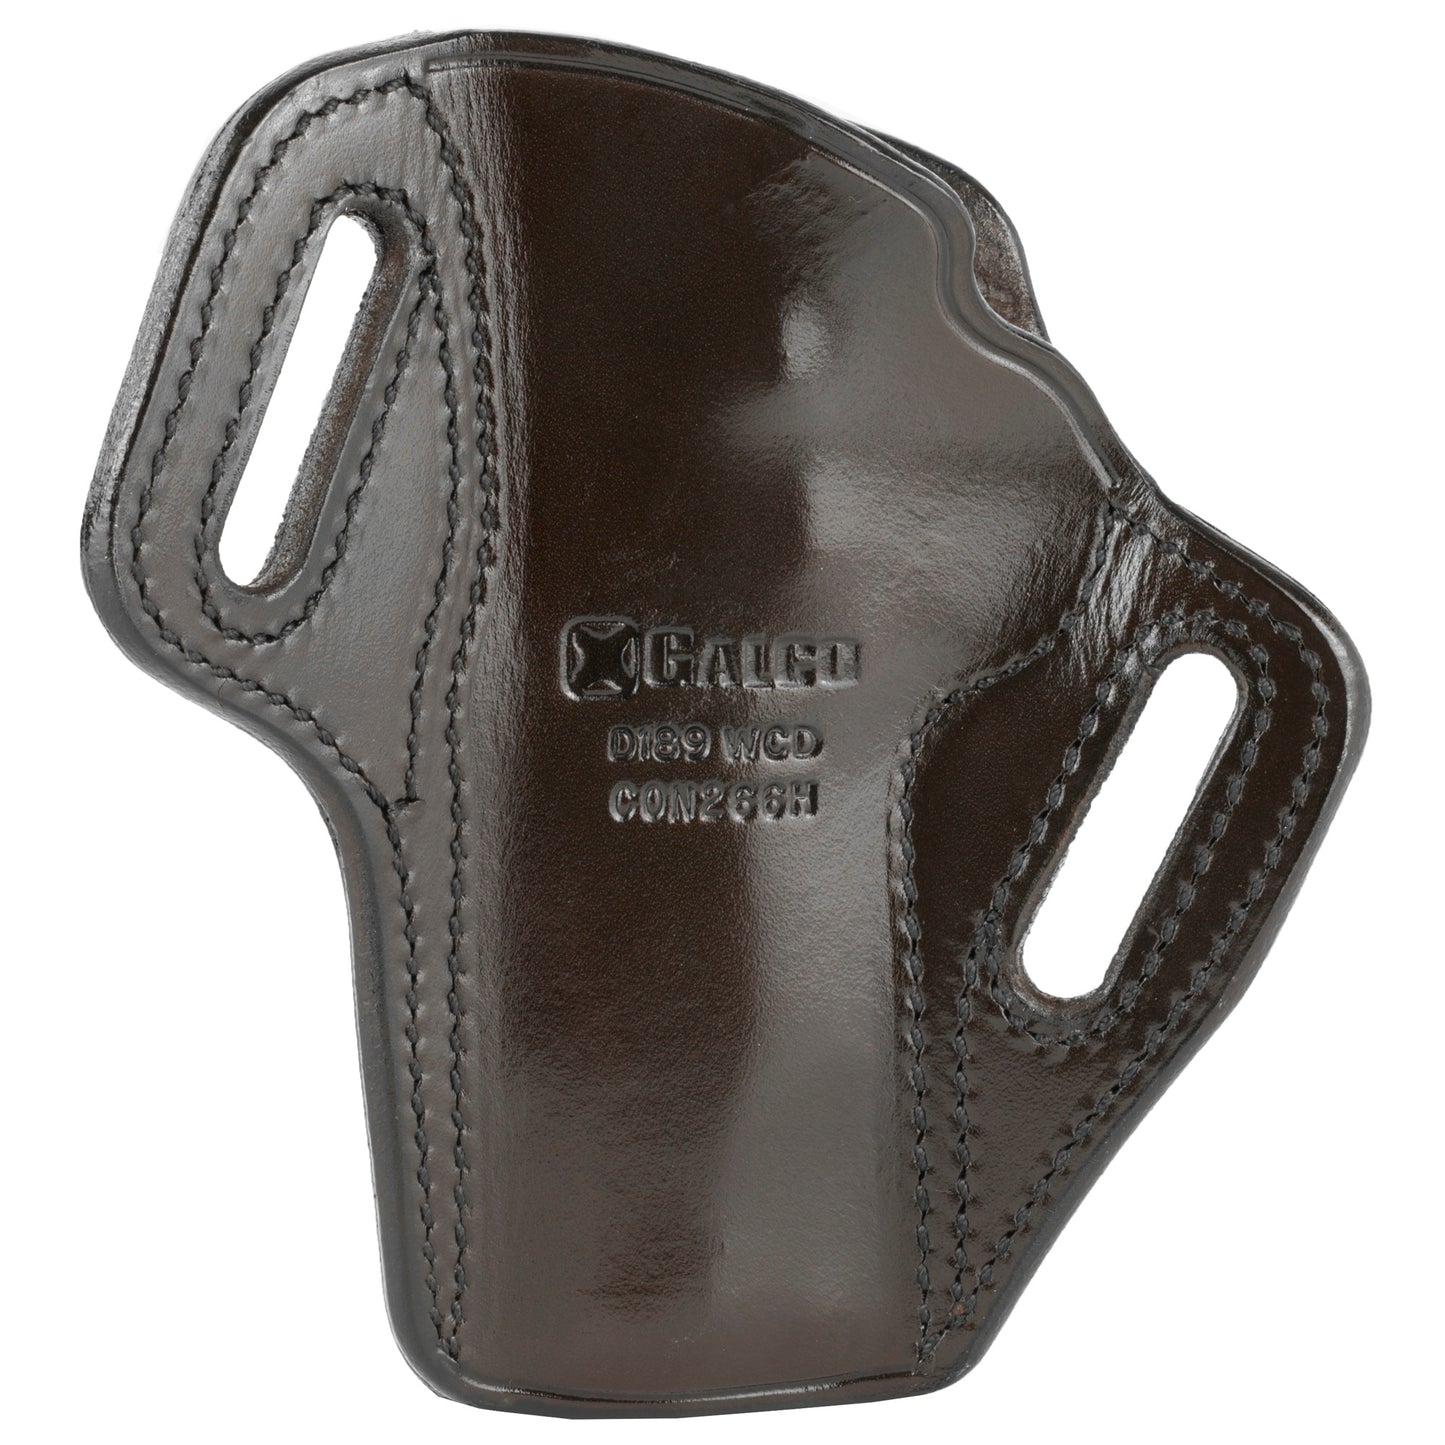 GALCO Concealable Belt Holster Fits Colt 1911 With 4 1/4" Barrel Right  CON266H